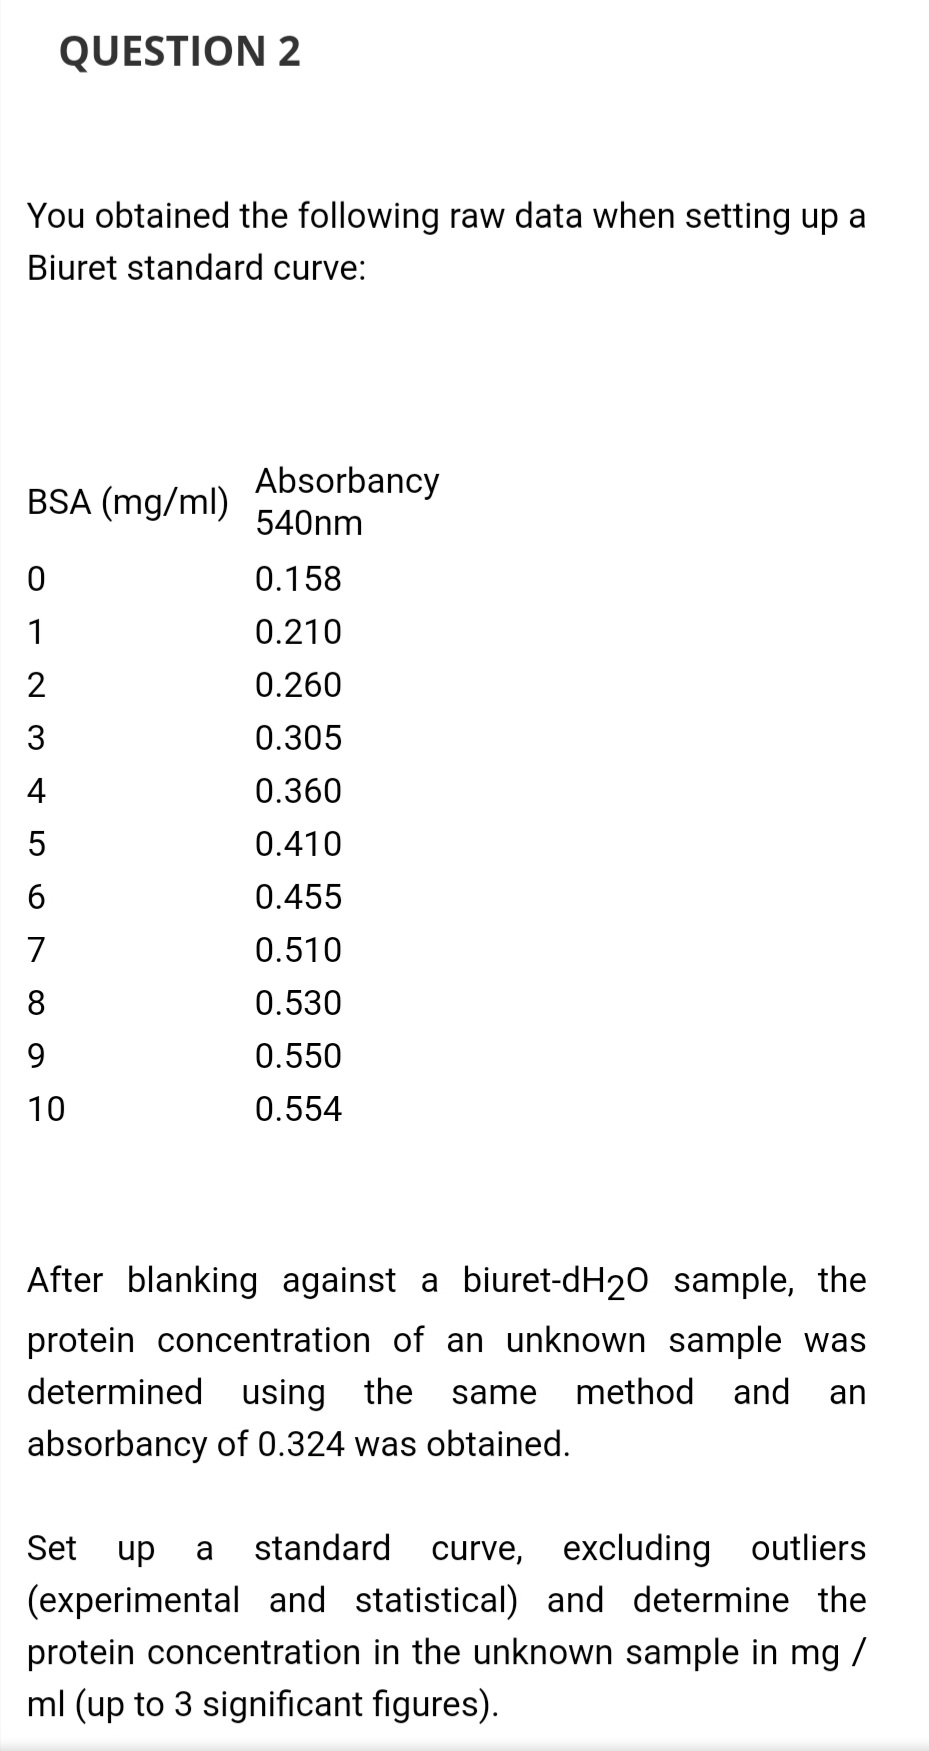 QUESTION 2
You obtained the following raw data when setting up a
Biuret standard curve:
Absorbancy
BSA (mg/ml)
540nm
0.158
1
0.210
2
0.260
0.305
4
0.360
0.410
0.455
7
0.510
8
0.530
9.
0.550
10
0.554
After blanking against a biuret-dH20 sample, the
protein concentration of an unknown sample was
determined using the
same
method and
an
absorbancy of 0.324 was obtained.
curve, excluding outliers
(experimental and statistical) and determine the
protein concentration in the unknown sample in mg /
Set up
a
standard
ml (up to 3 significant figures).
5
